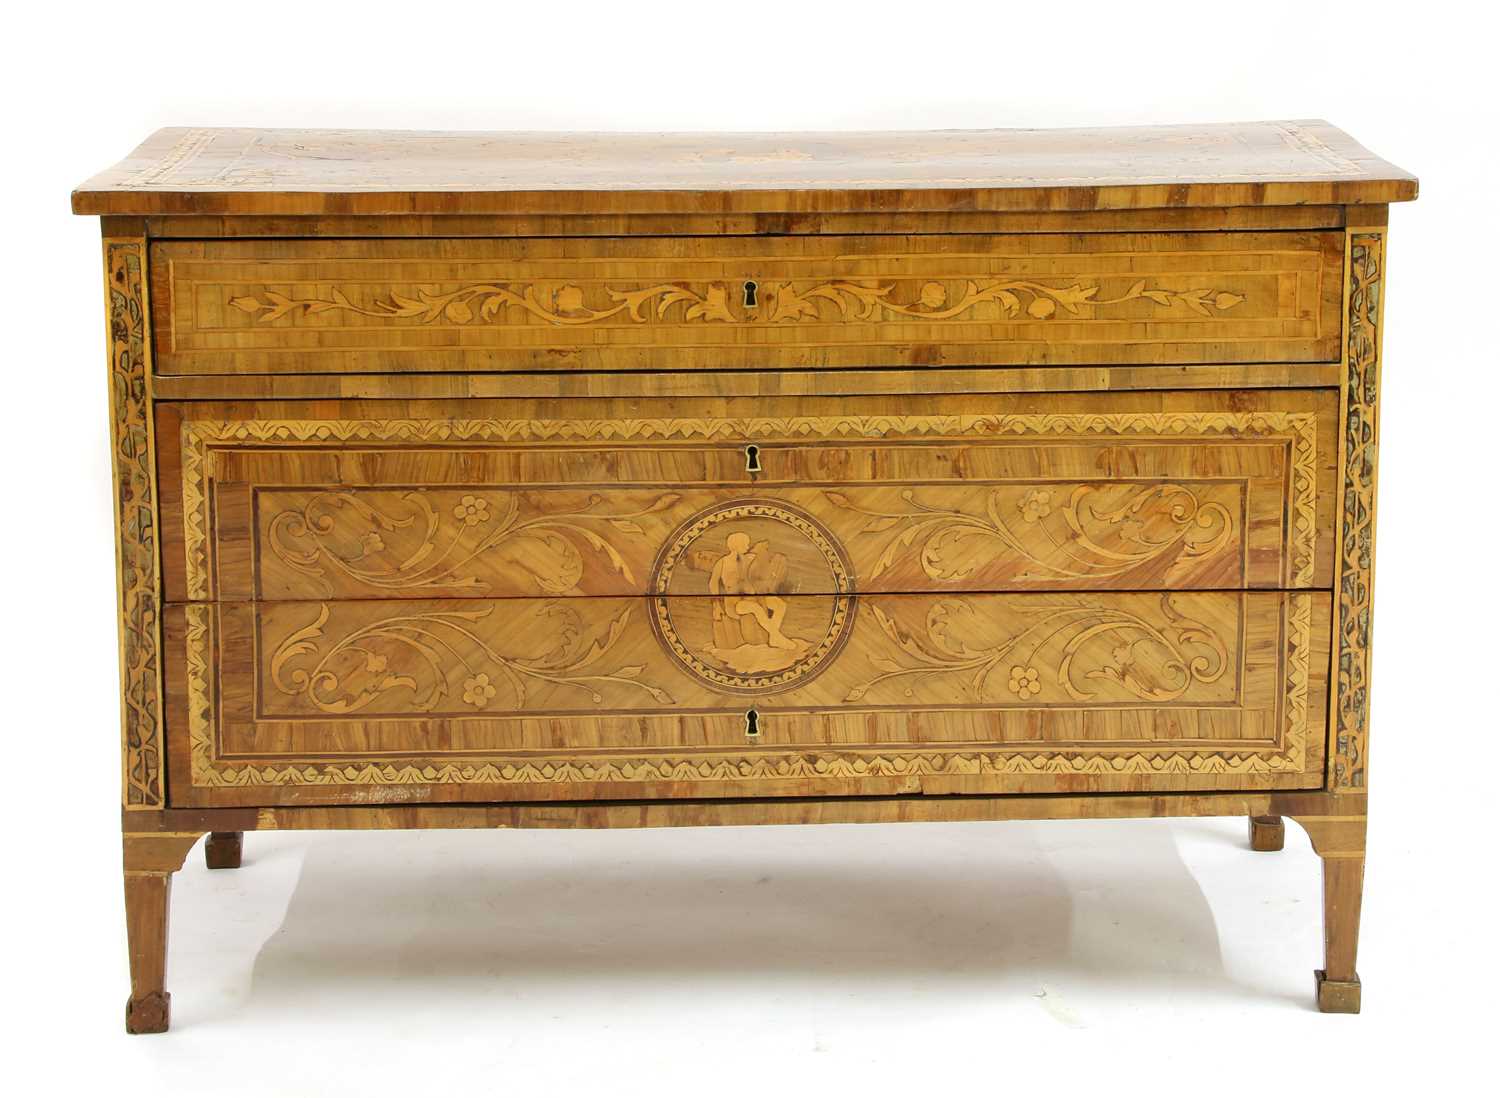 An Italian marquetry-inlaid specimen wood commode,